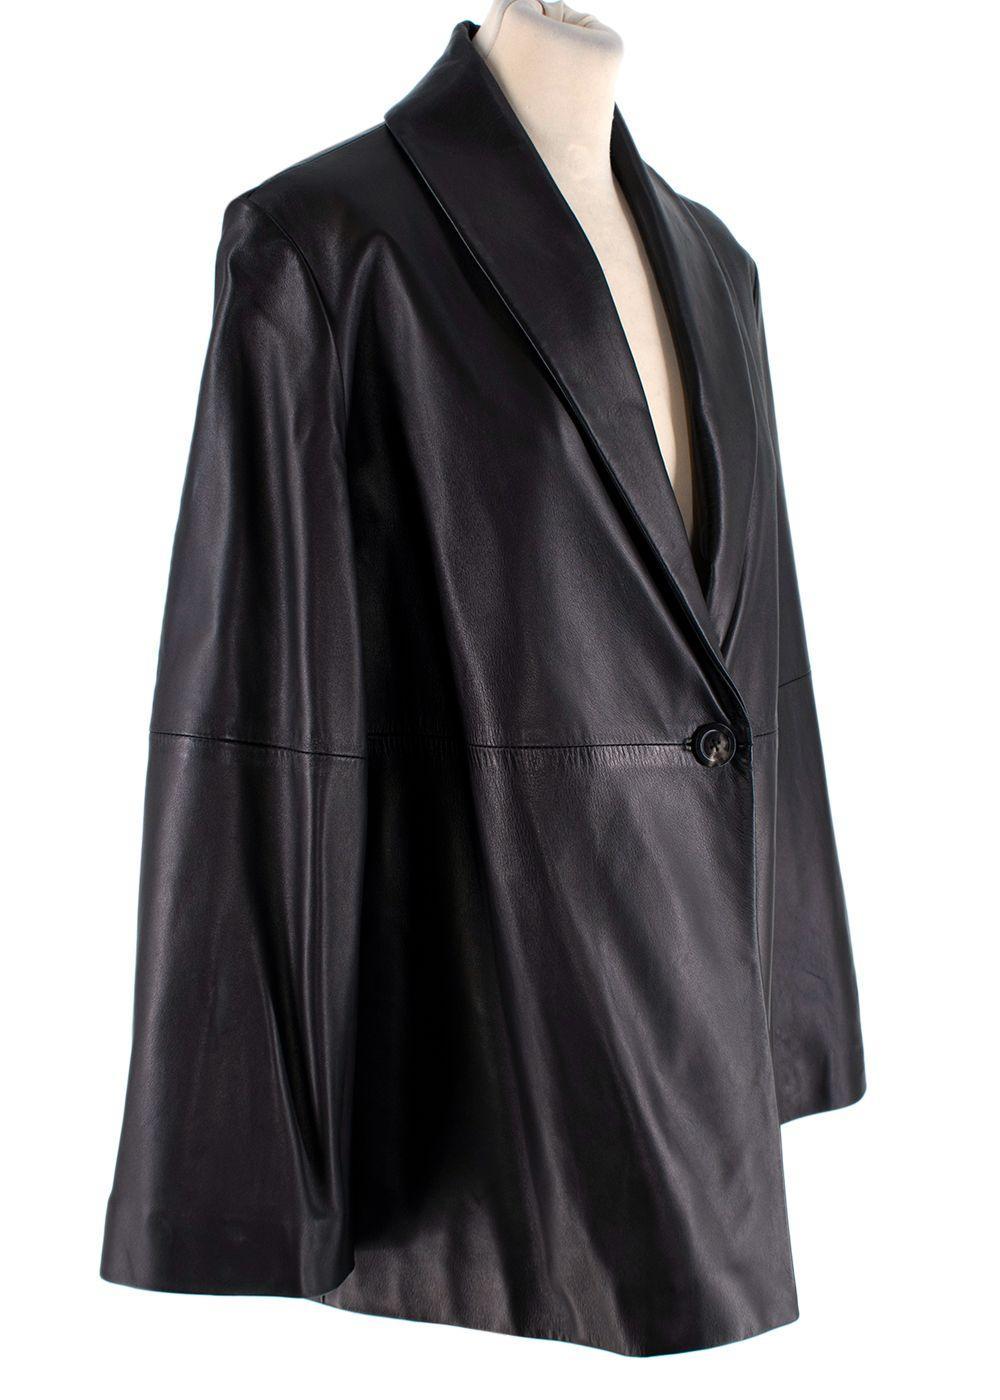 The Row Black Smooth Leather Single-Breasted Blazer

- Black smooth and supple leather
- Single breast, single-button closure
- Shawl collar
- Swing back silhouette and flared sleeves

9.5
Excellent condition

Materials:
Leather

Made in USA

PLEASE